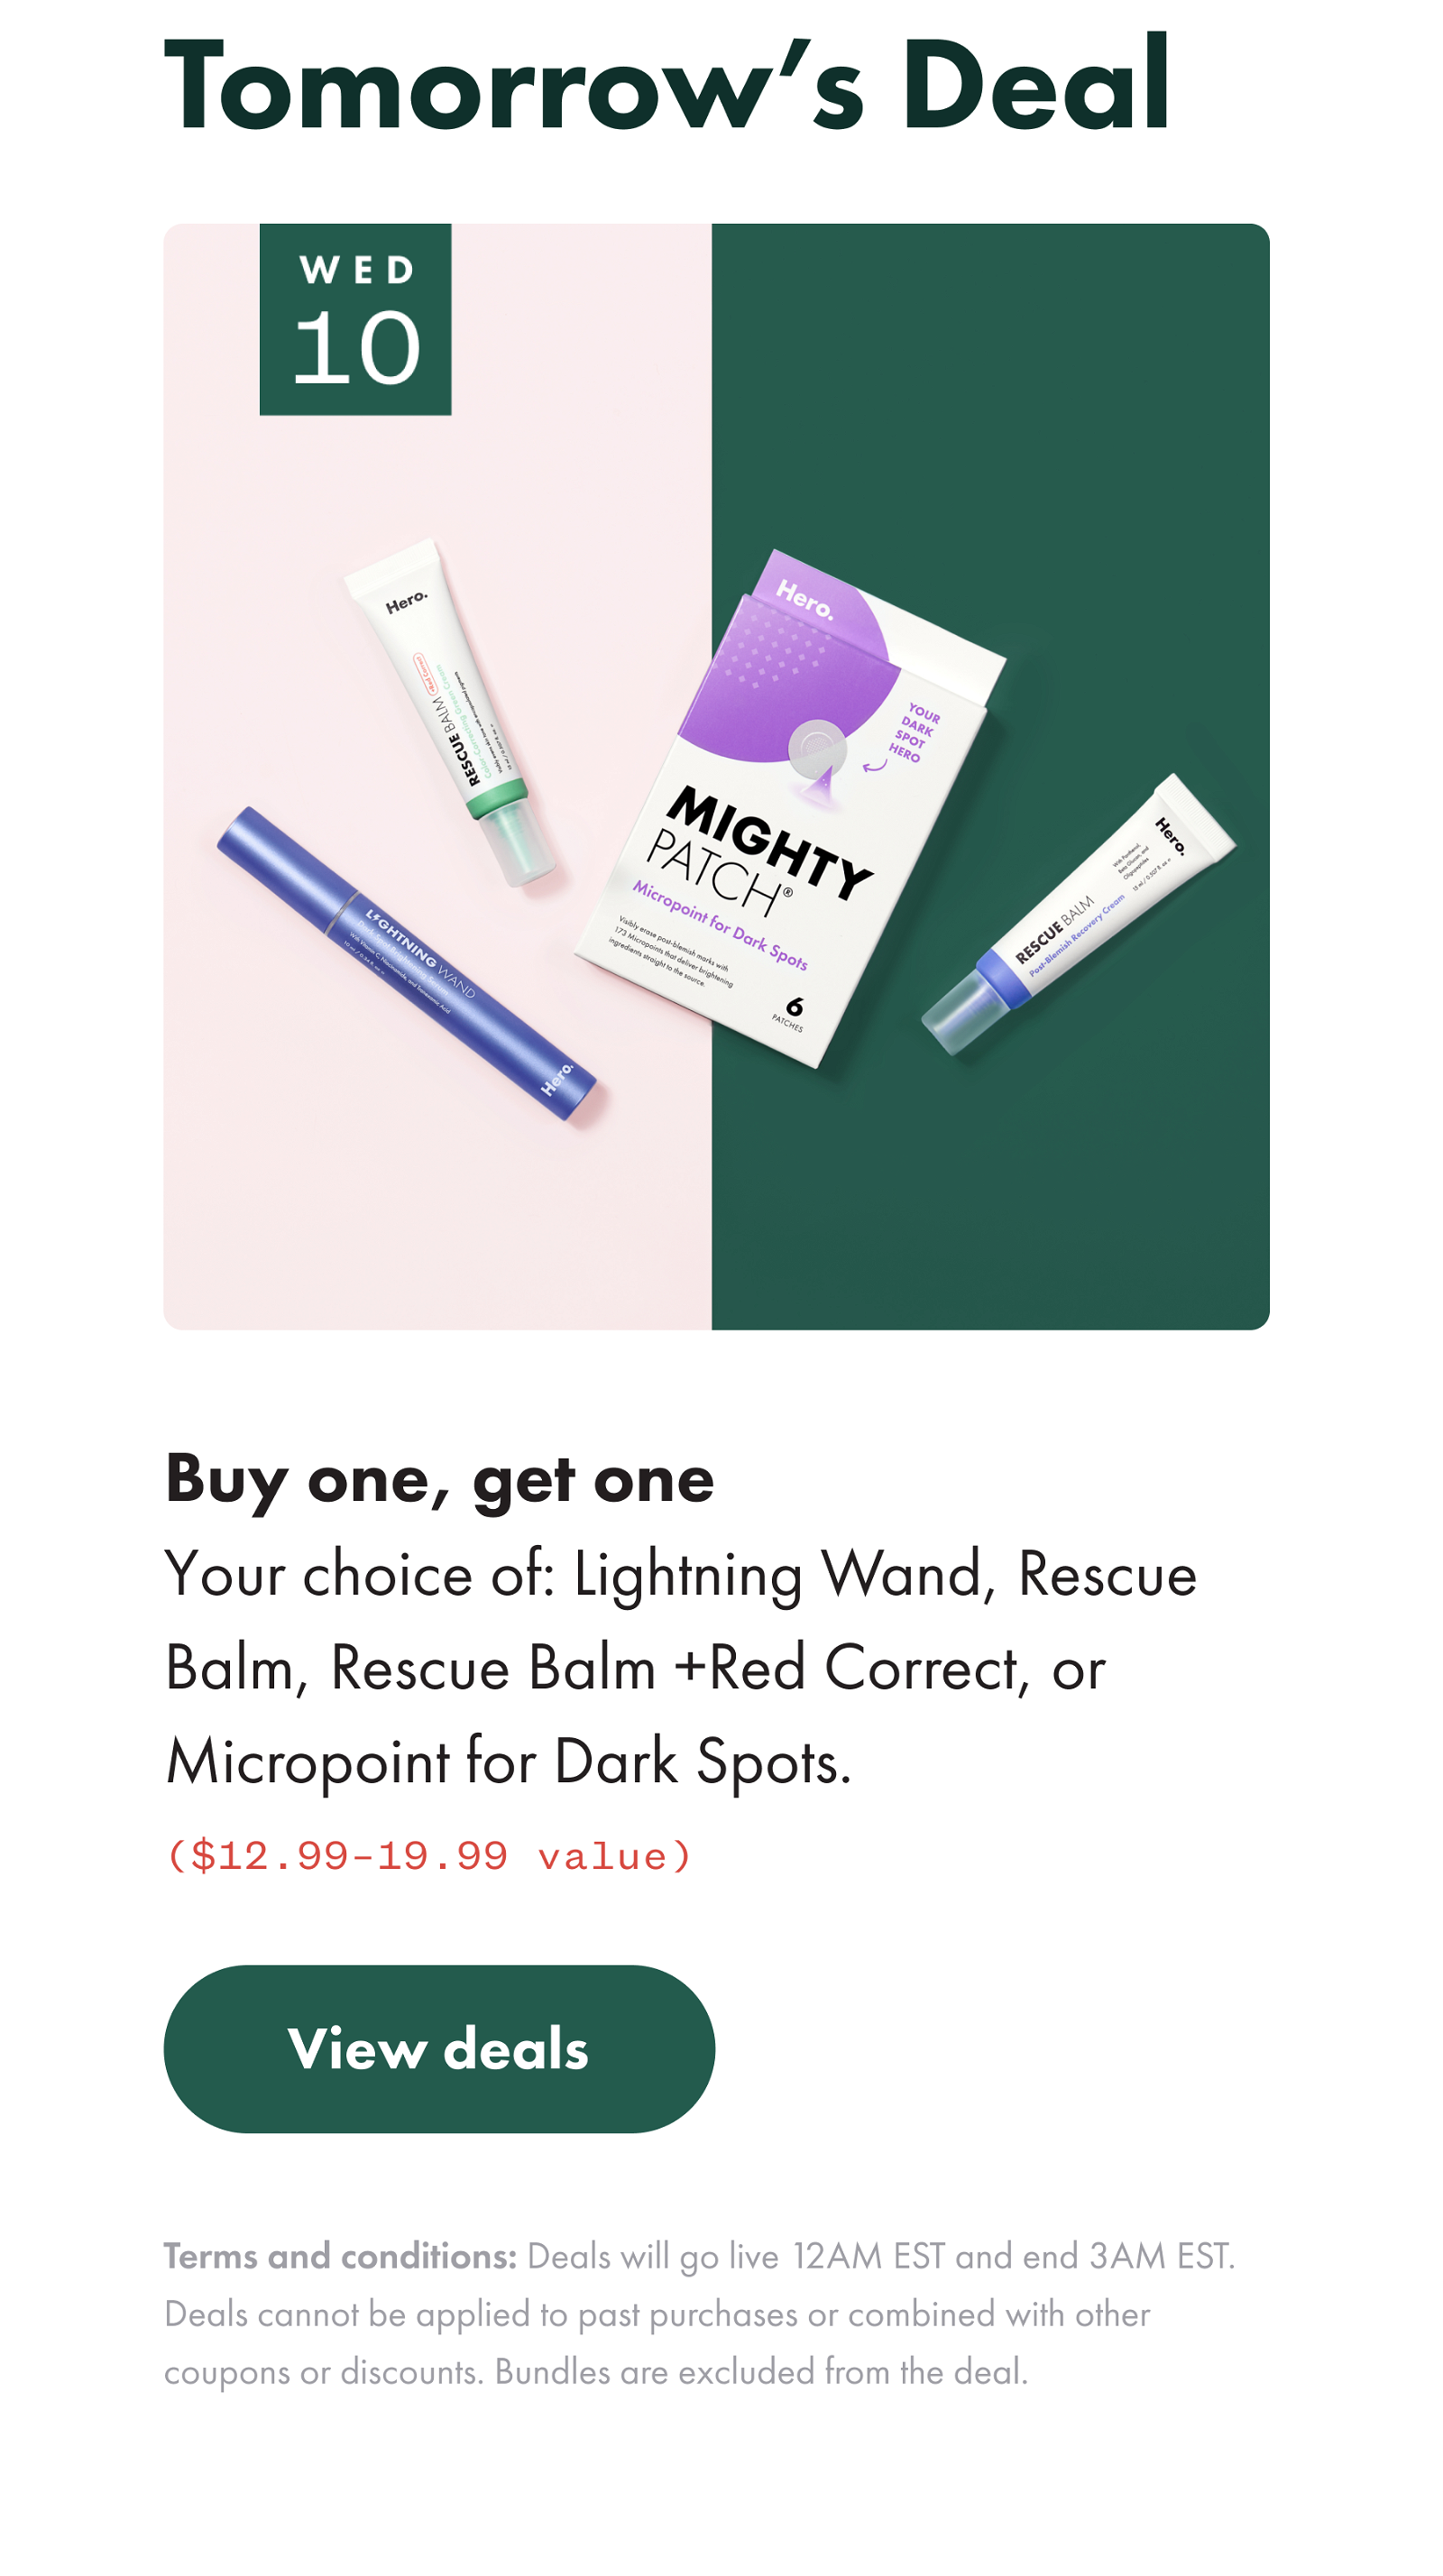 Micropoint for Blemishes, Lightning Wand, Rescue Balm +Red Correct, and Rescue Balm holiday product image